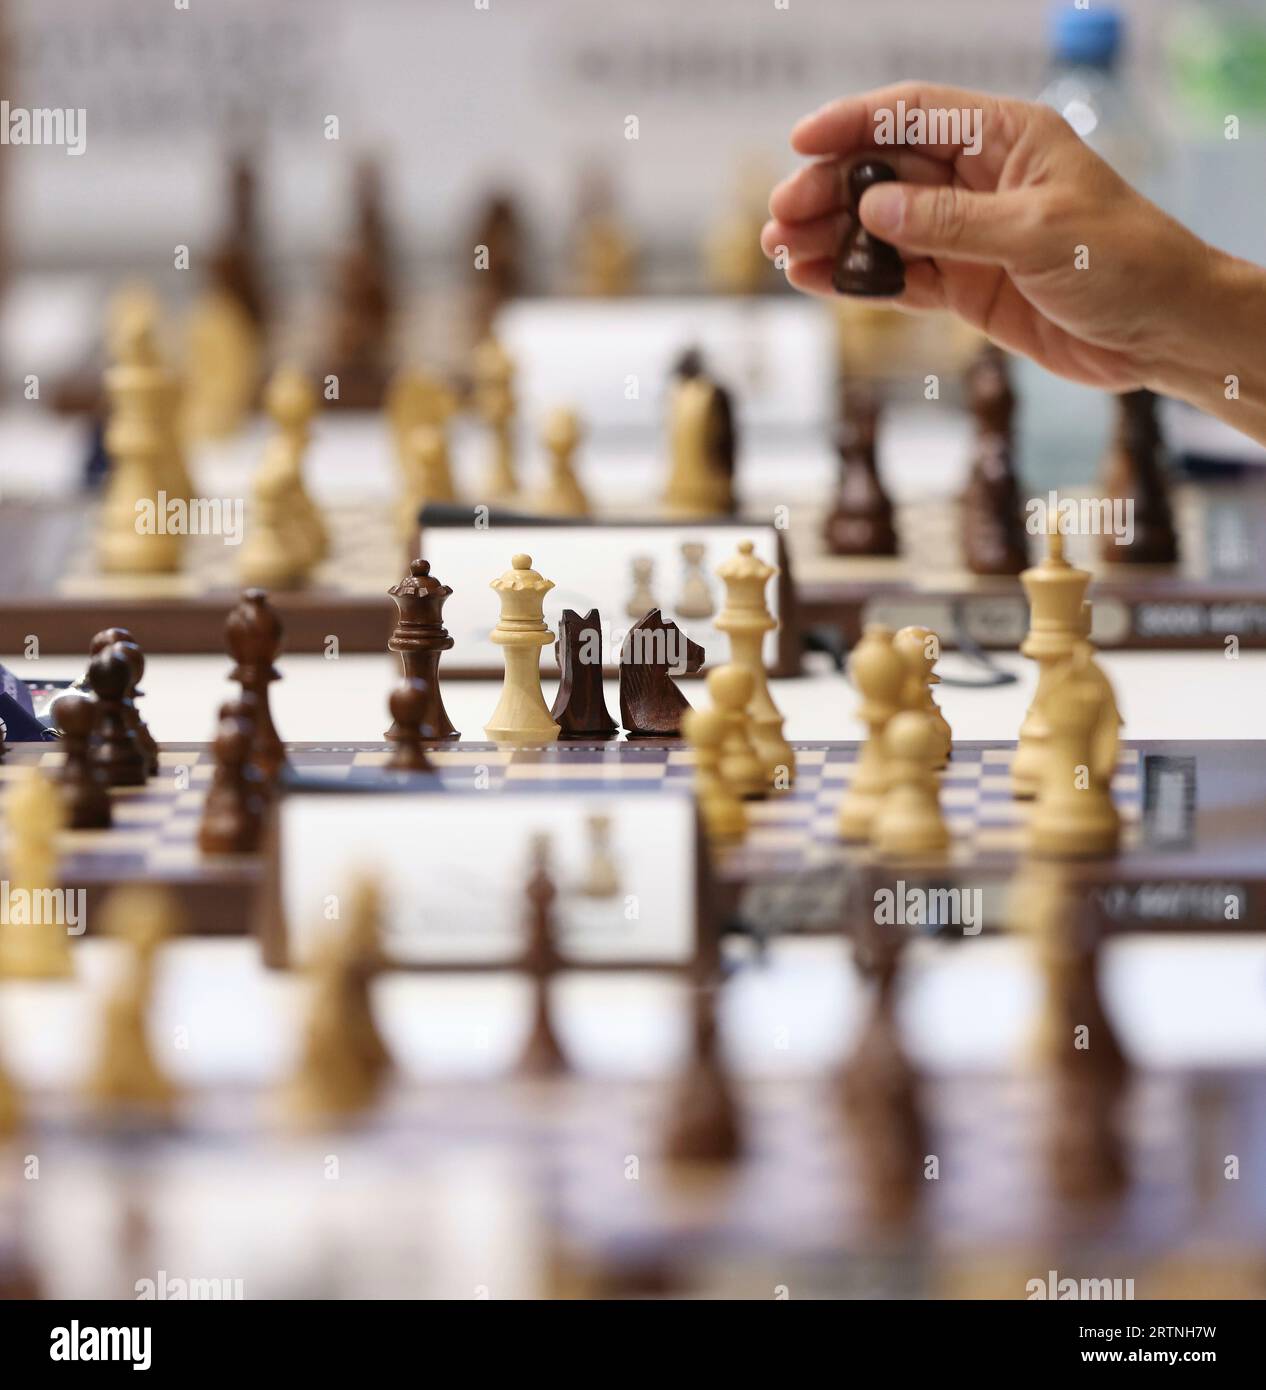 Team WR Chess wins the World Rapid Team Championship 2023 in